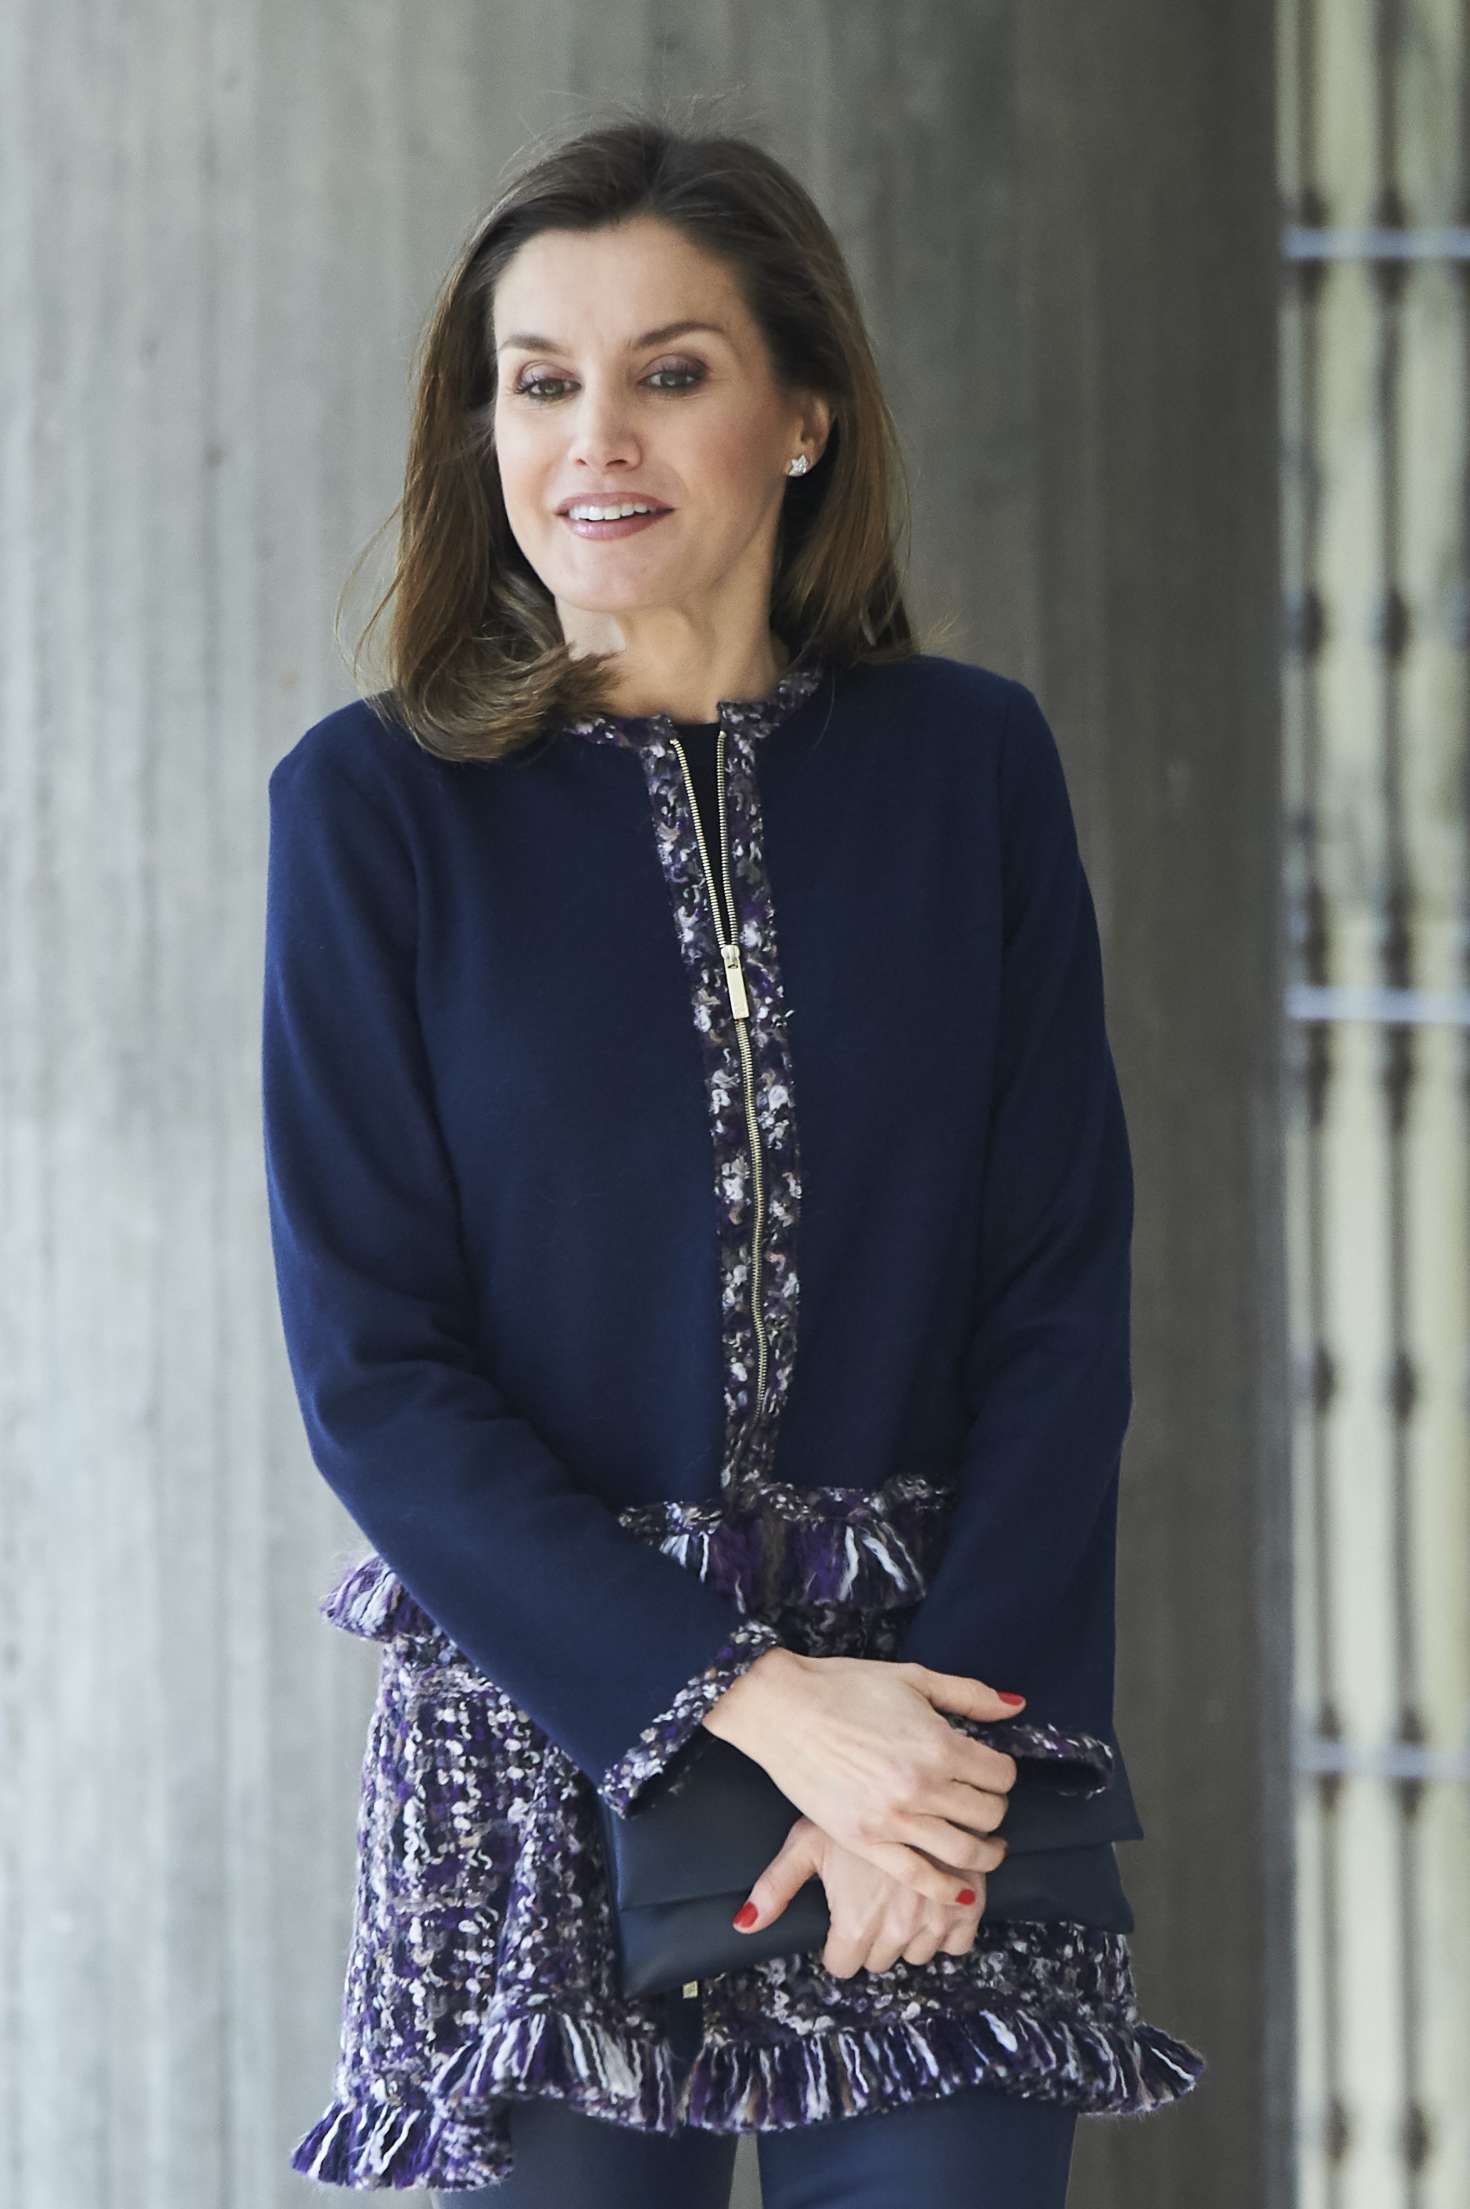 Queen Letizia: Heading to a meeting in Madrid -07 – GotCeleb